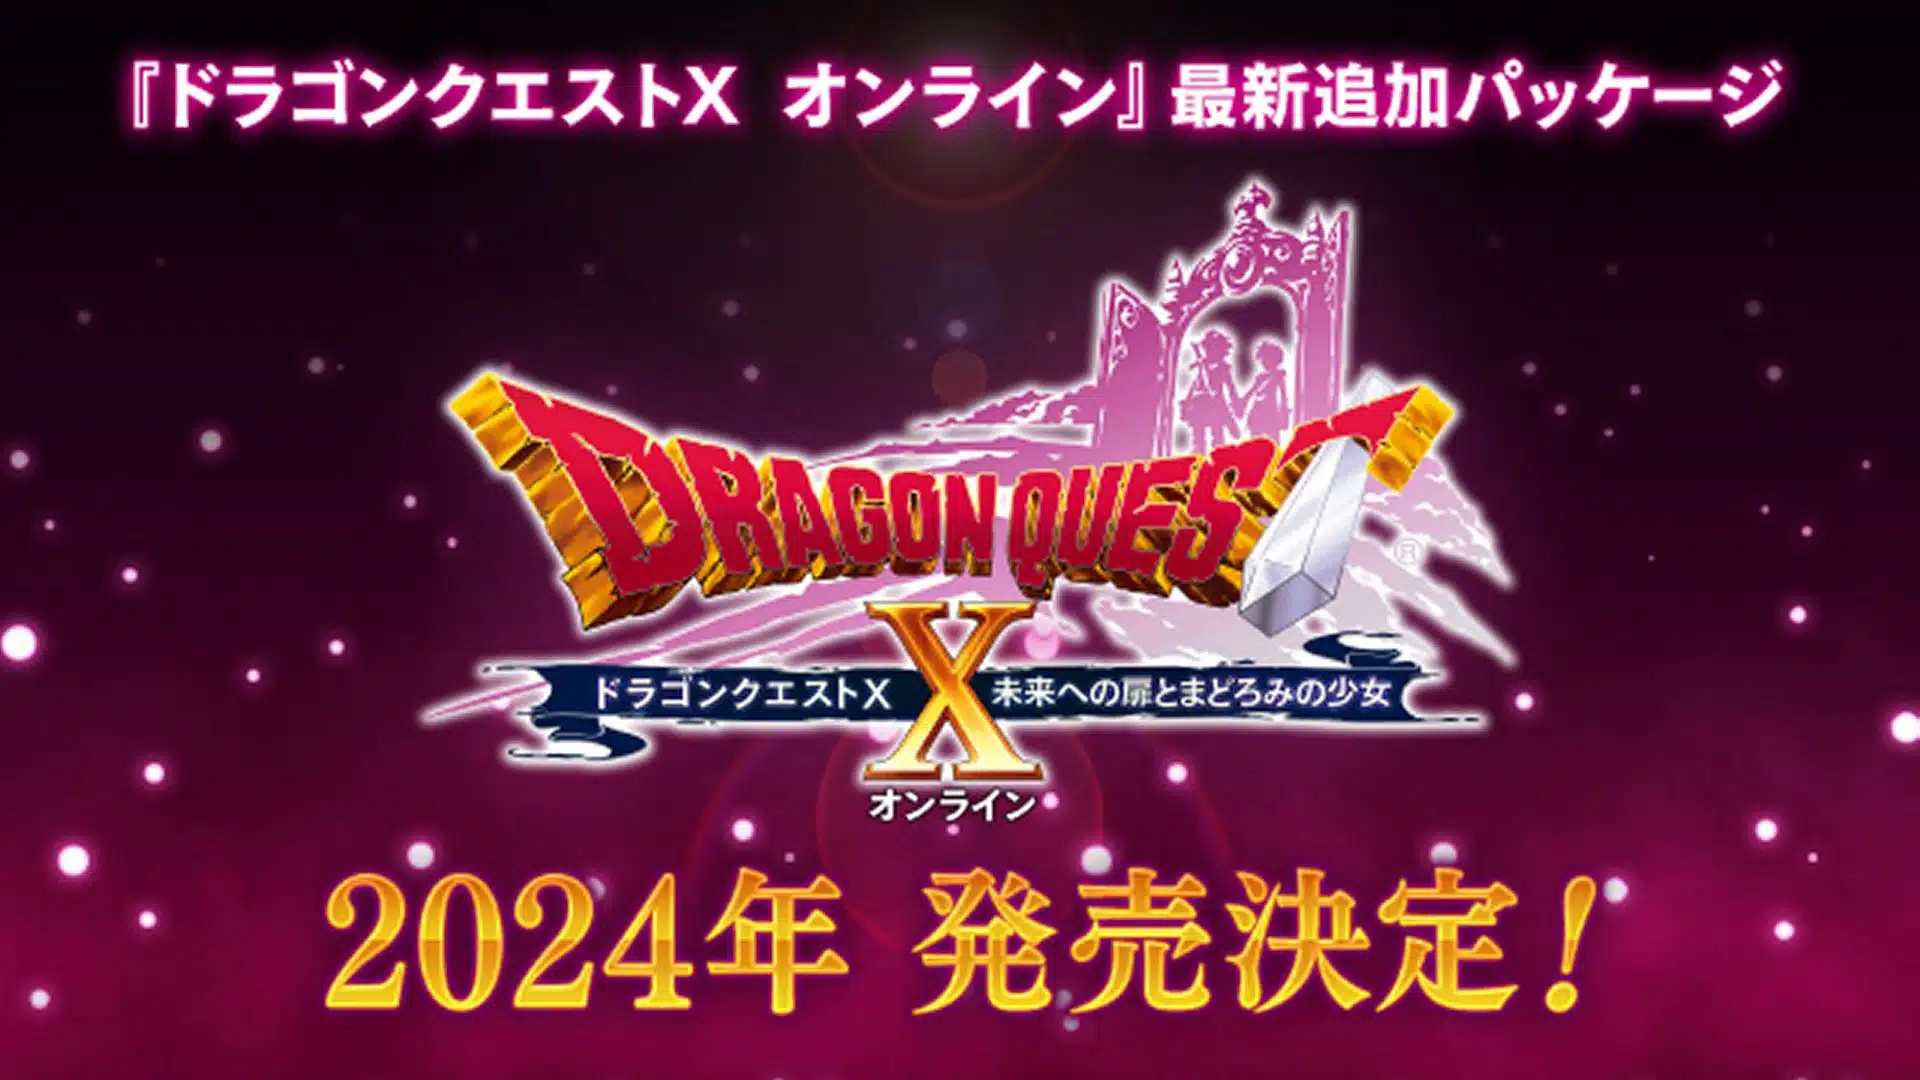 Dragon Quest X Online Version 7.0 Expansion Confirmed; Wii U and 3DS Versions Shutting Down